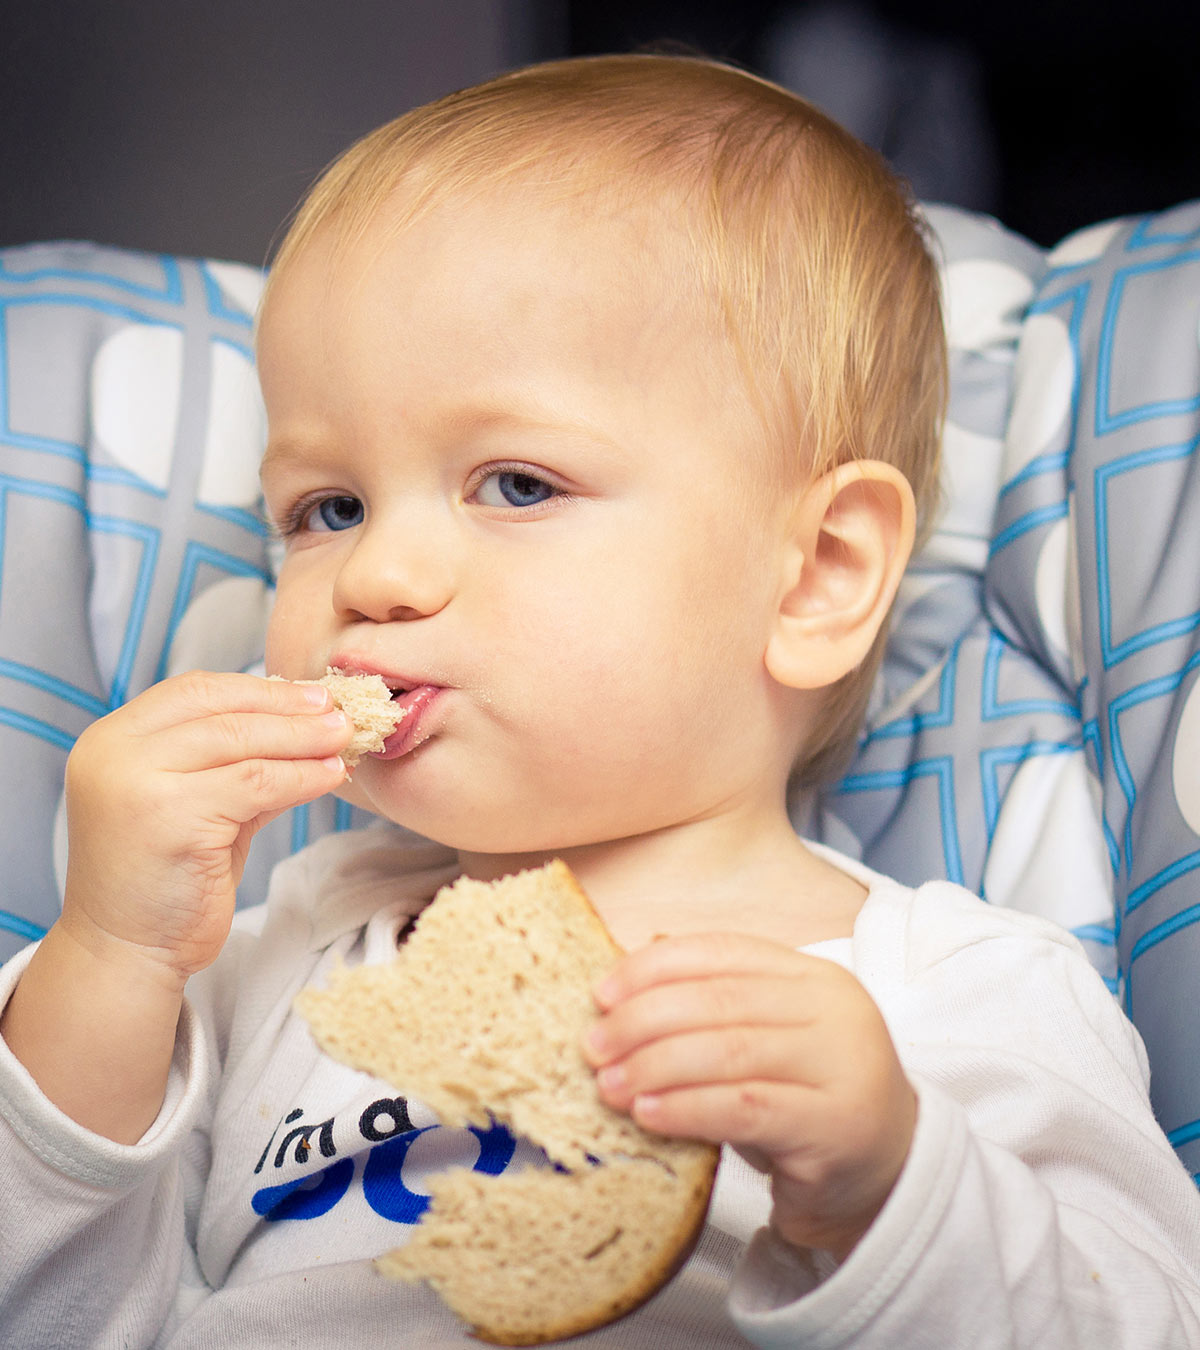 Wheat For Babies: Right Age To Introduce And Precautions To Take